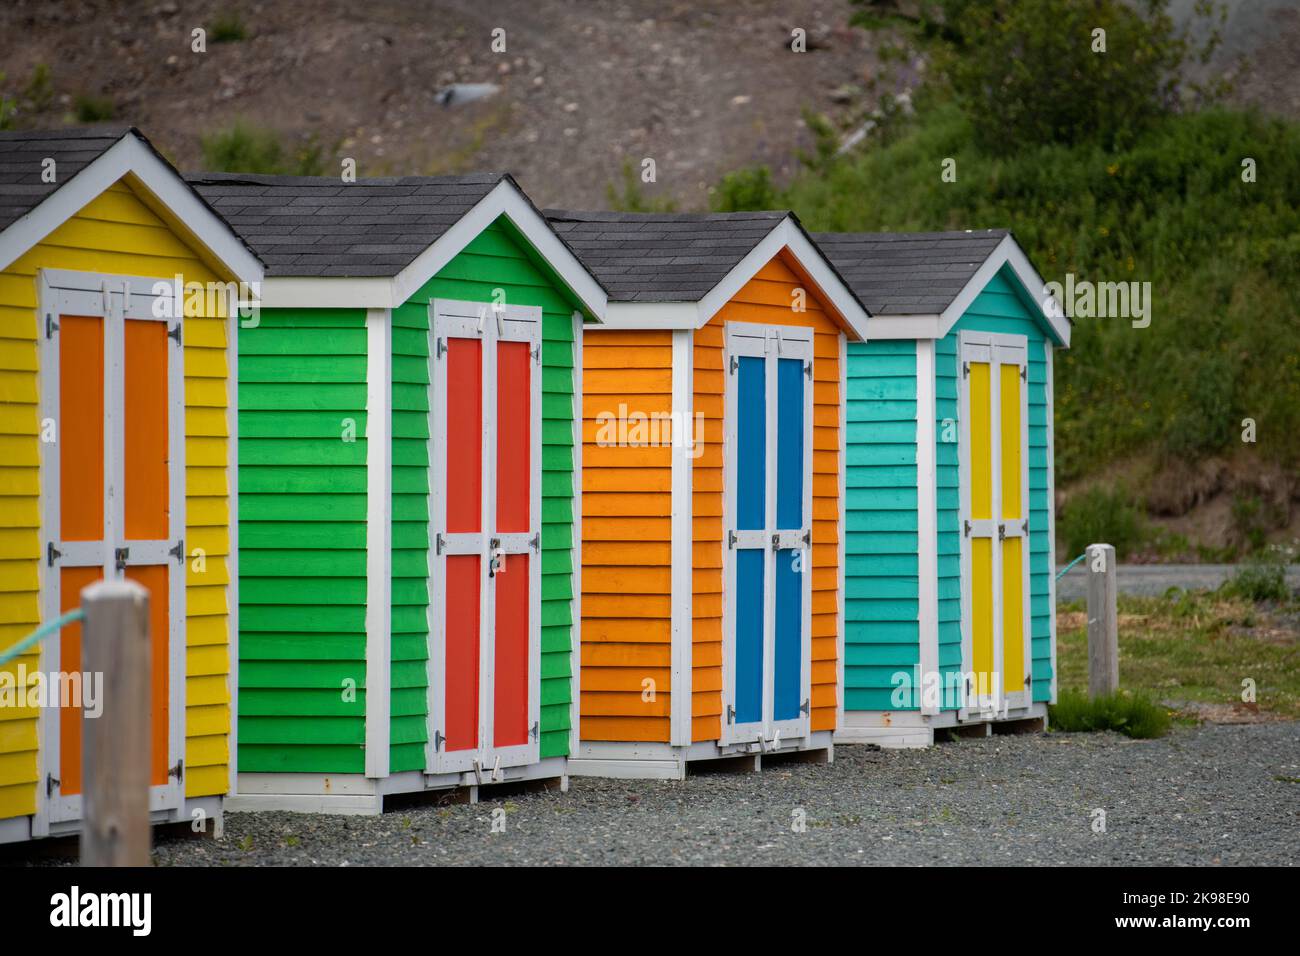 A row of small colorful painted huts or sheds made of wood. The exterior walls are colorful with double wooden doors. The sky is blue in the back Stock Photo